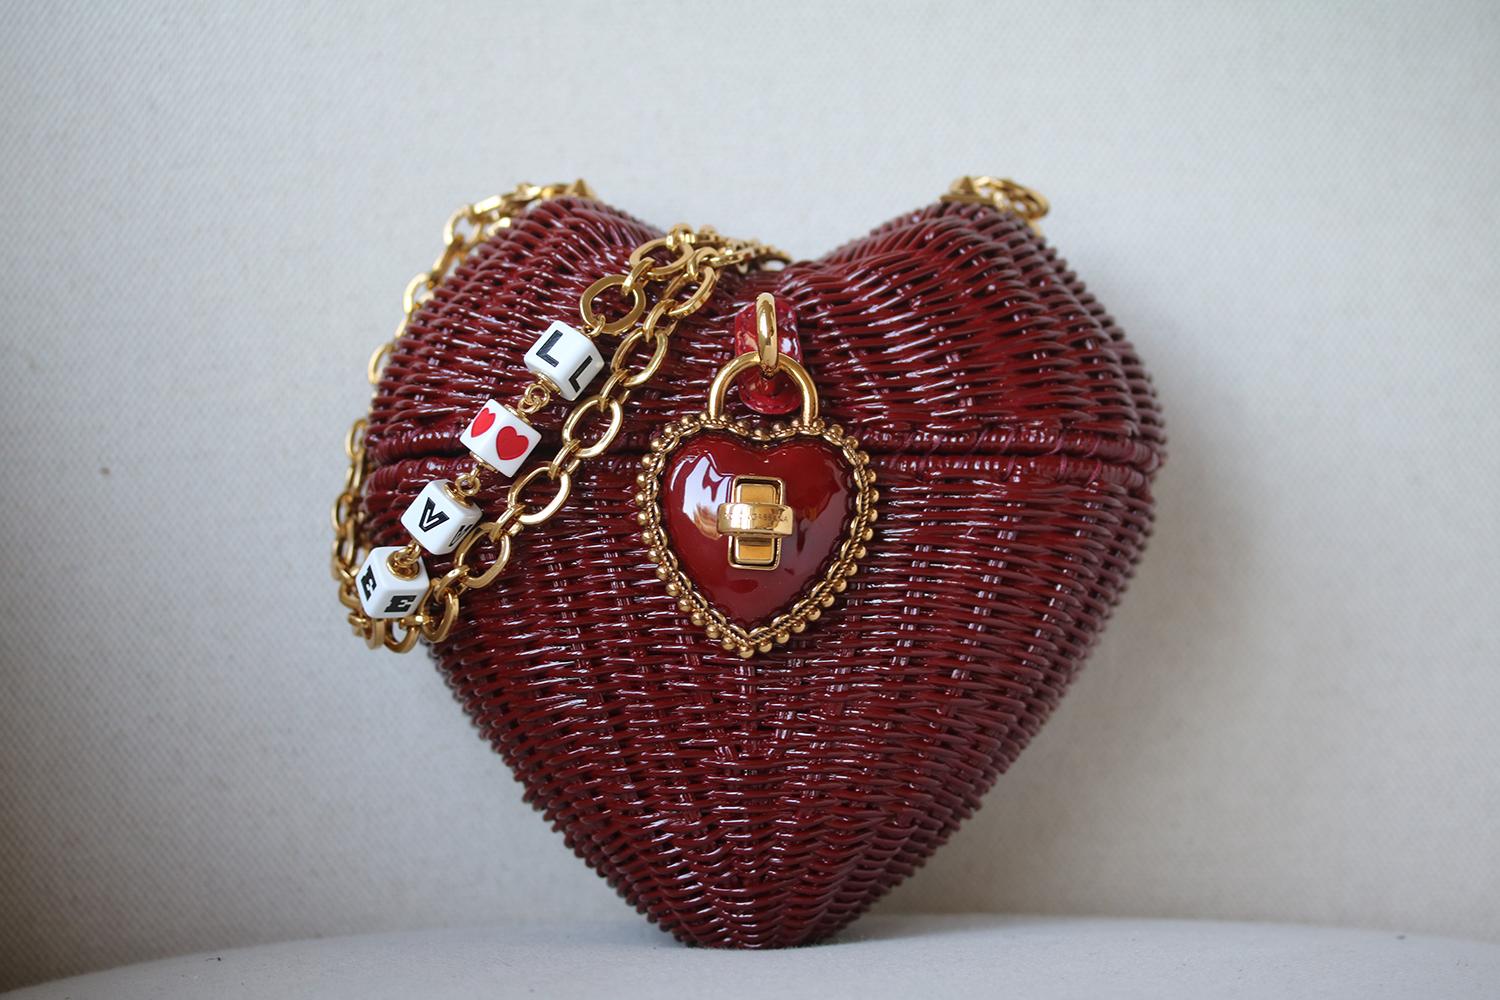 The sacred heart, an emblem of Dolce&Gabbana’s heritage, illuminates the collection with love and passion. Fully hand-crafted cross-body bag from the Heart Box line in painted woven wicker. Heart padlock closure in resin and filigree. Through chain